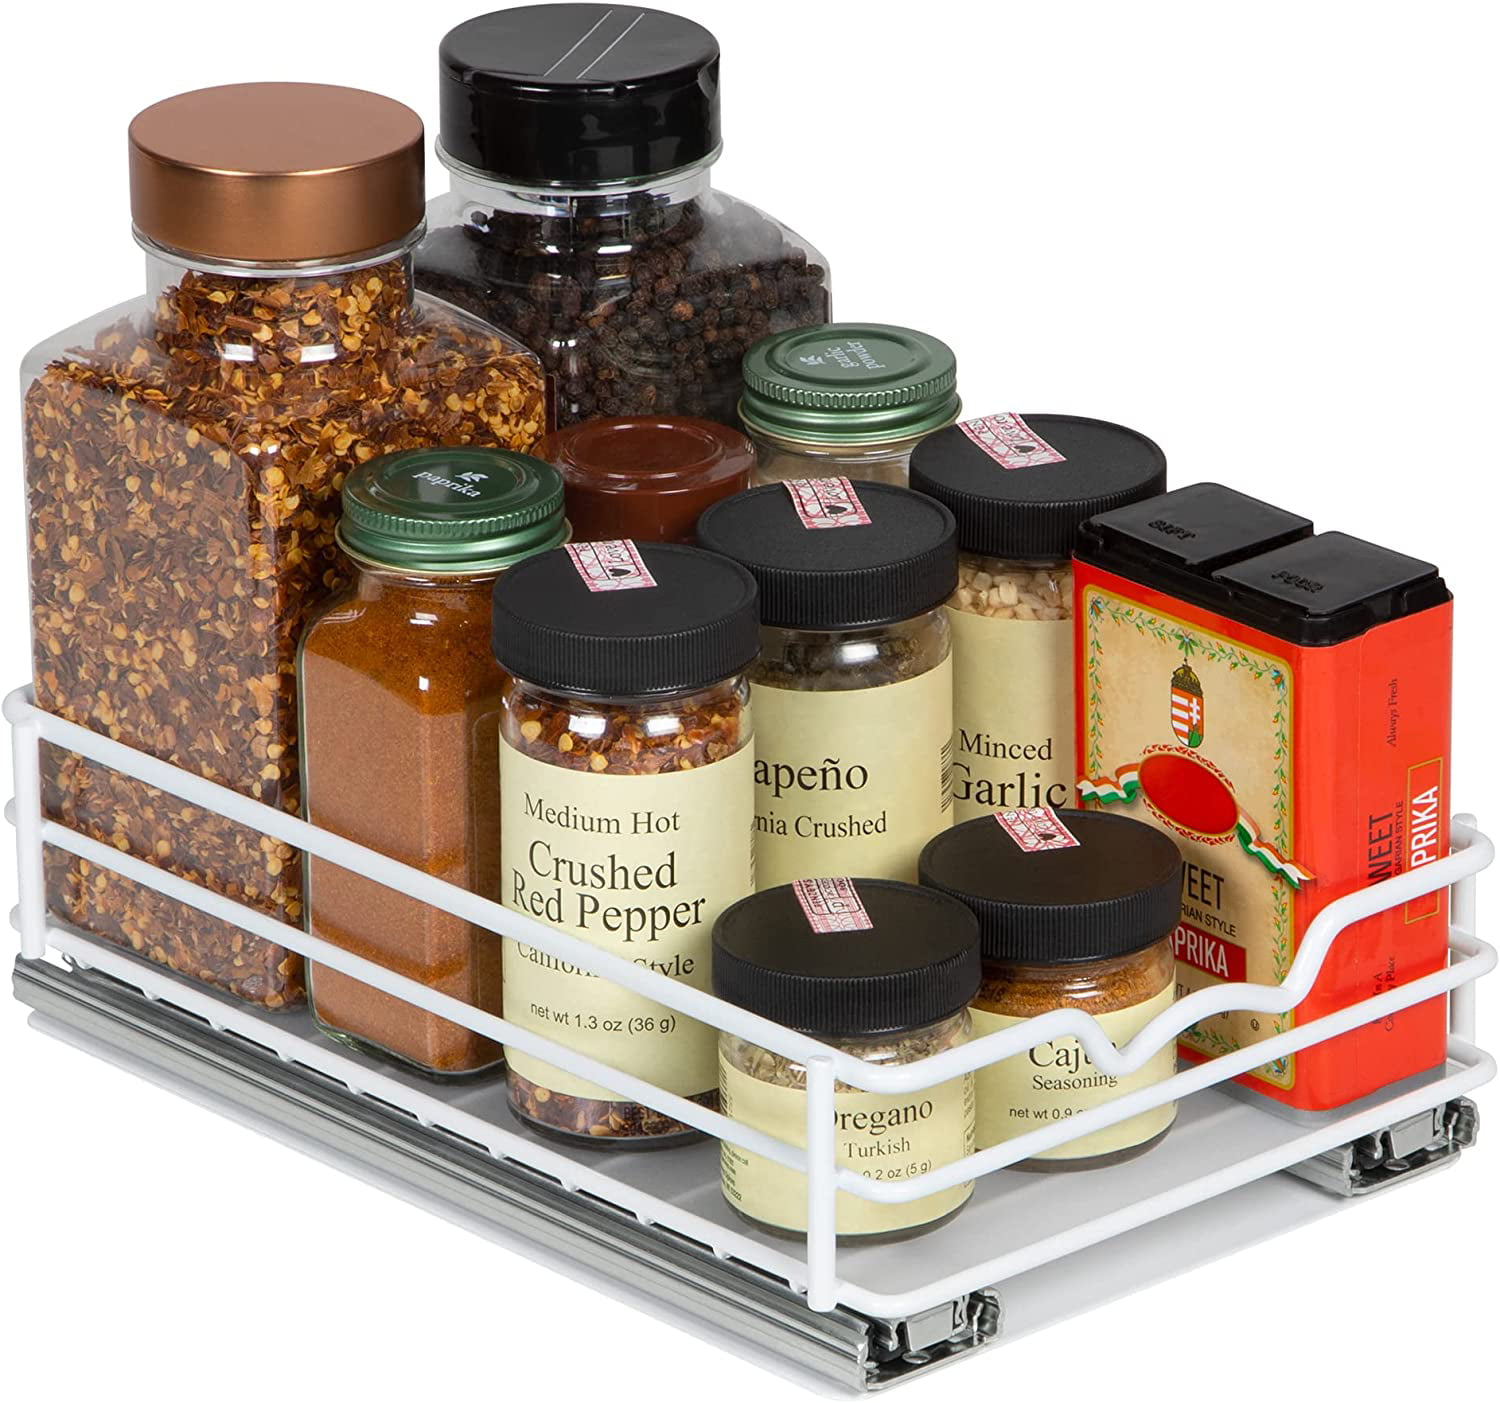  HOLDN' STORAGE Spice Rack Organizer for Cabinet, Heavy Duty -  Pull Out Spice Rack 5 Year Warranty- Spice Organization 8-1/2Wx10-3/8  Dx8-7/8 H - Spice Racks for Inside Cabinets & Pantry Closet. 